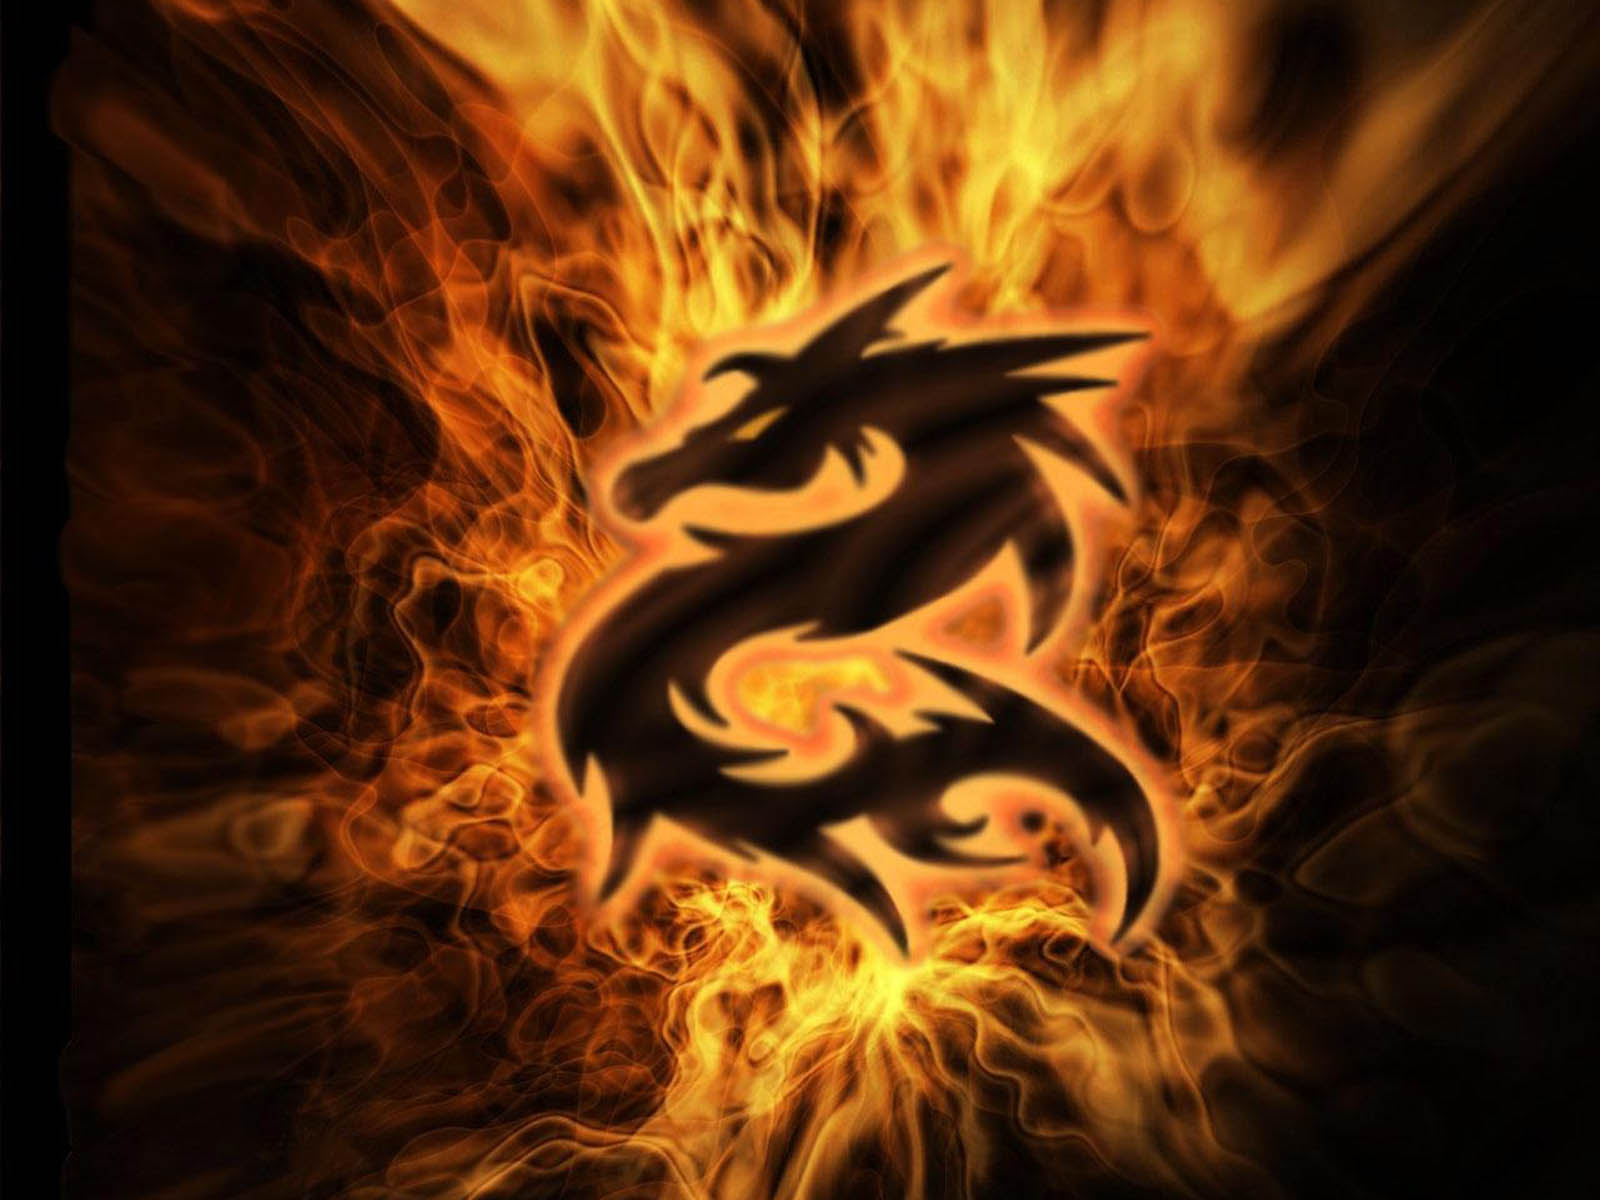  Dragon Wallpapers Images Photos Pictures and Backgrounds for free